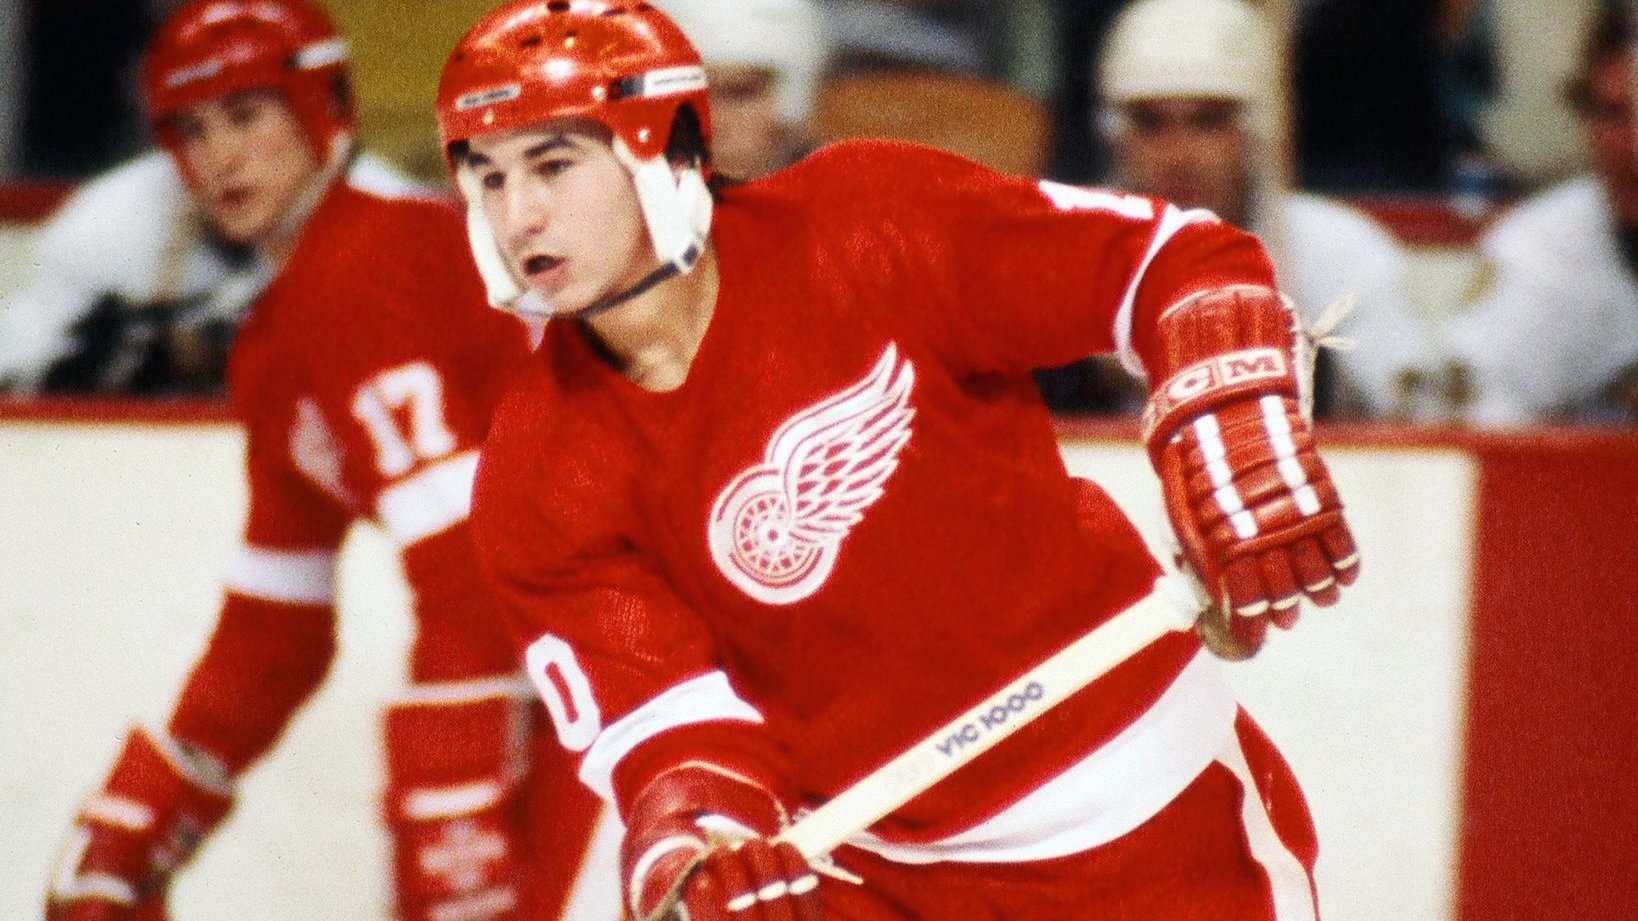 This Day In Hockey History-June 14, 1977-Dale McCourt Taken First Overall by Red Wings in 1977 NHL Draft